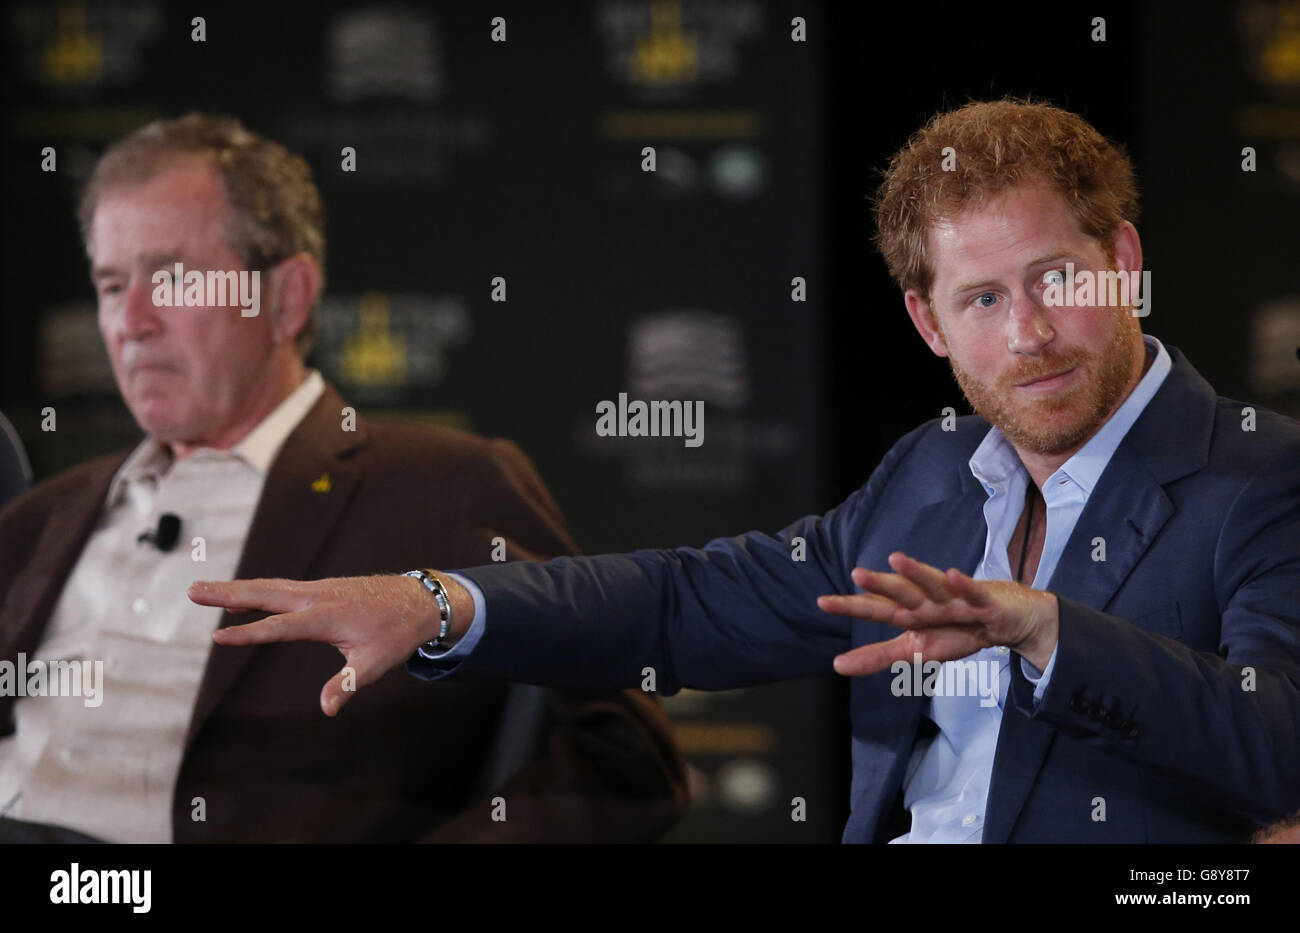 Prince Harry (right) and former US President George W Bush attend the Symposium on Invisible Wounds presented by the George W. Bush Institute, as part of the Invictus Games, at Shades of Green Hotel in Orlando, Florida. Stock Photo